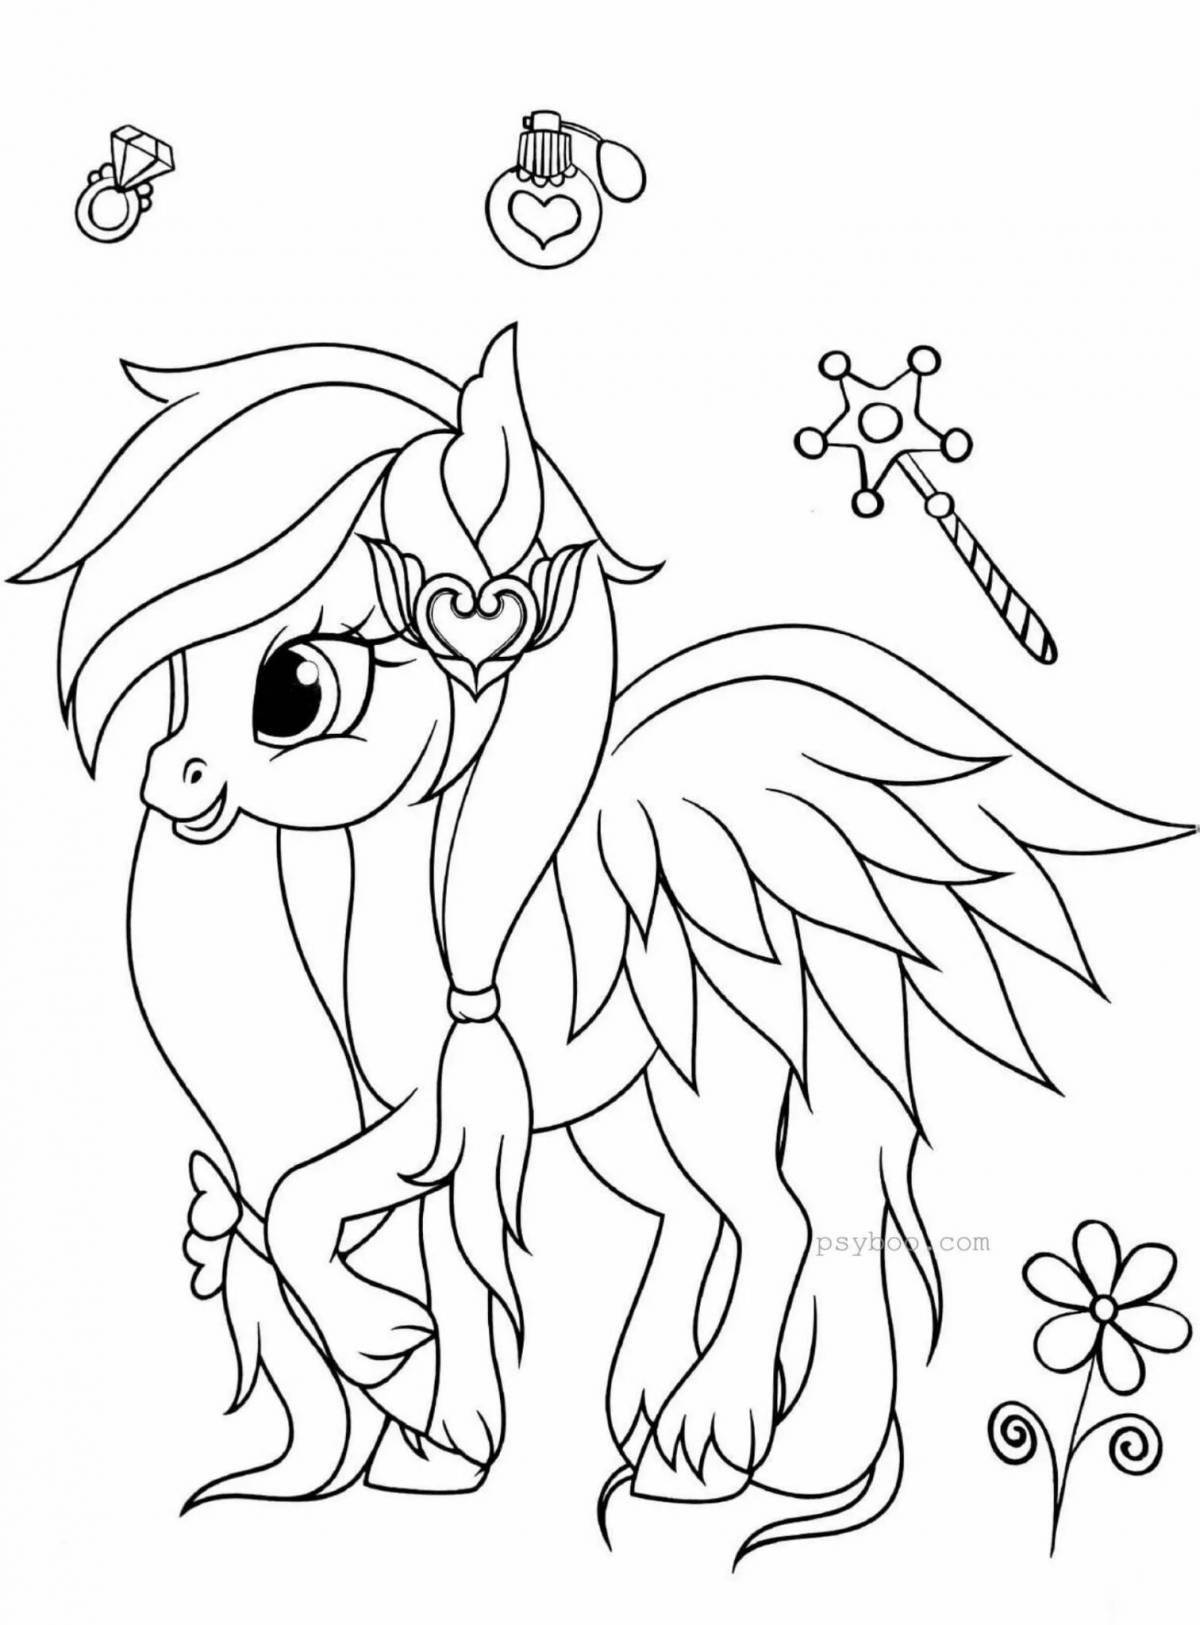 Amazing pony coloring game for girls